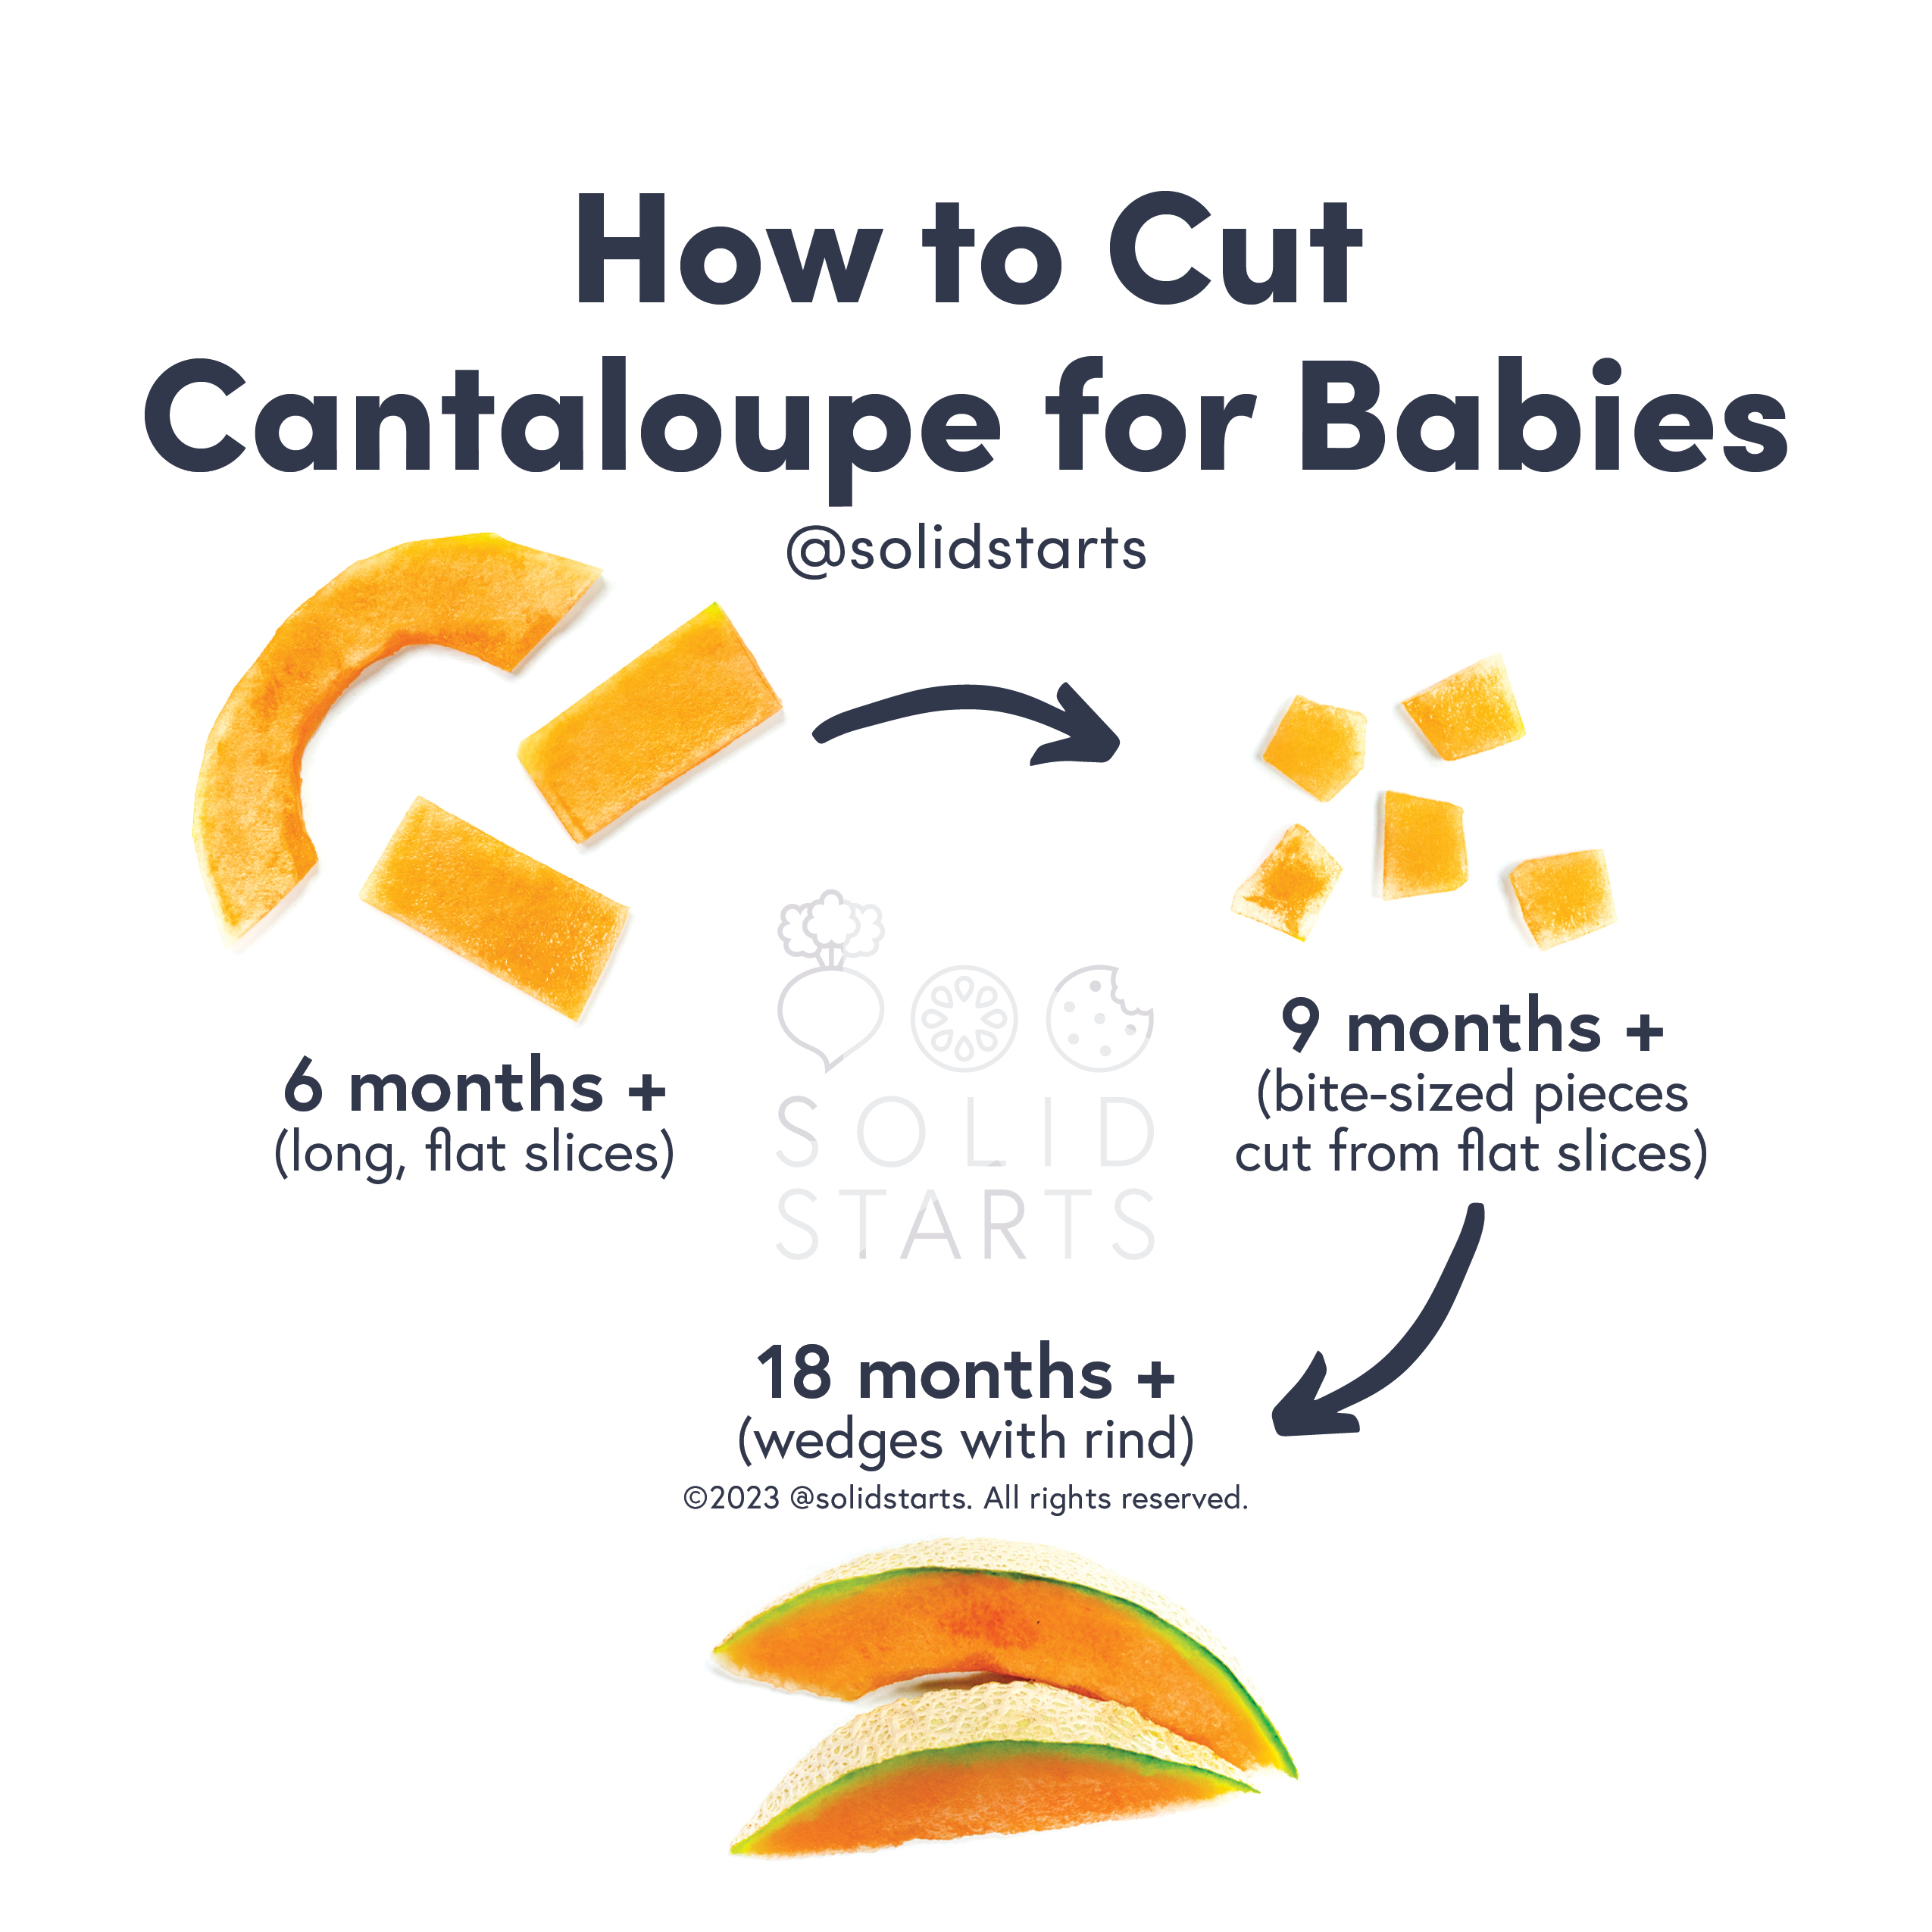 How to Cut Cantaloupe for Babies